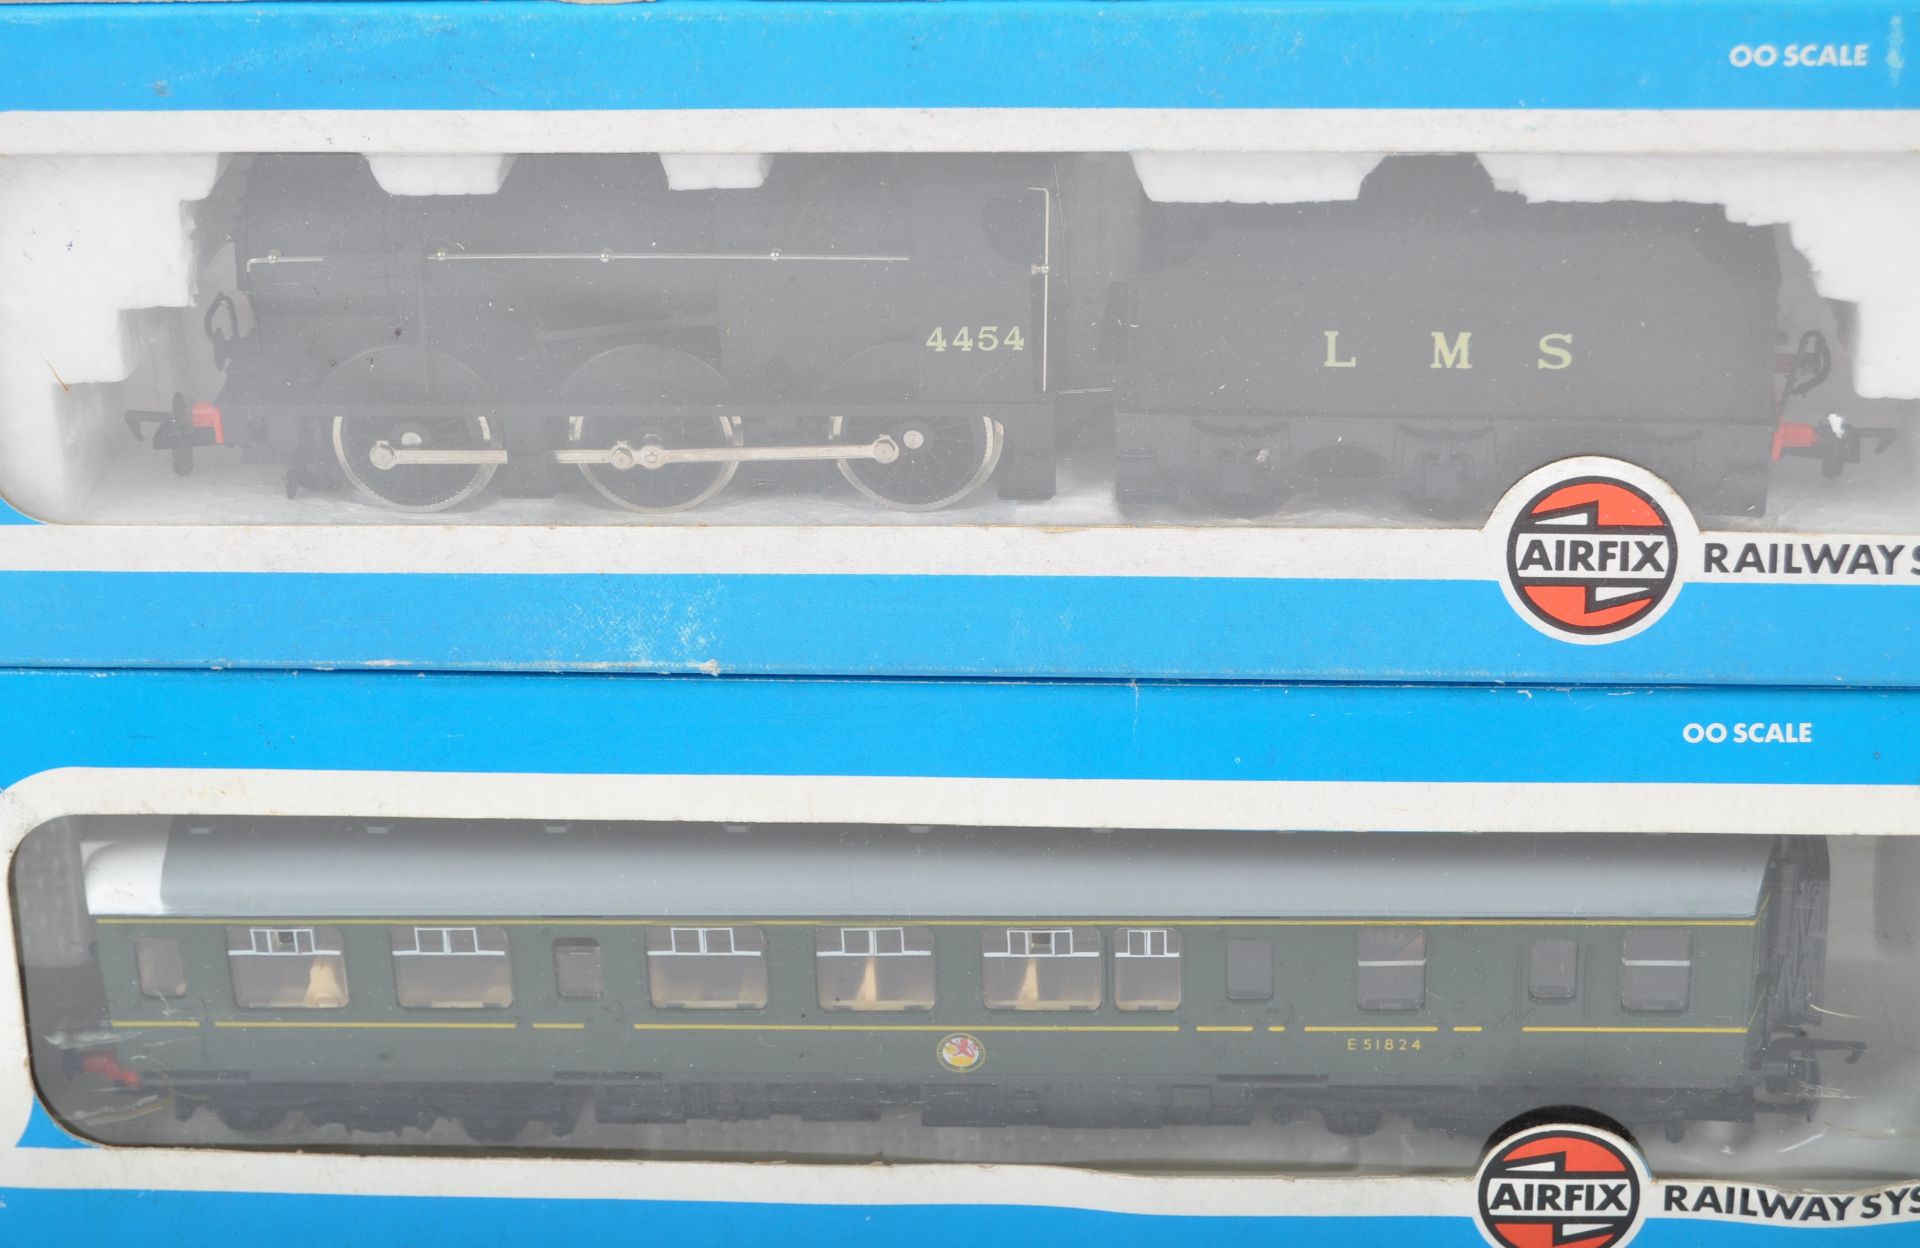 COLLECTION OF X4 AIRIX 00 GAUGE TRAINSET LOCO AND CARRIAGES - Image 2 of 5